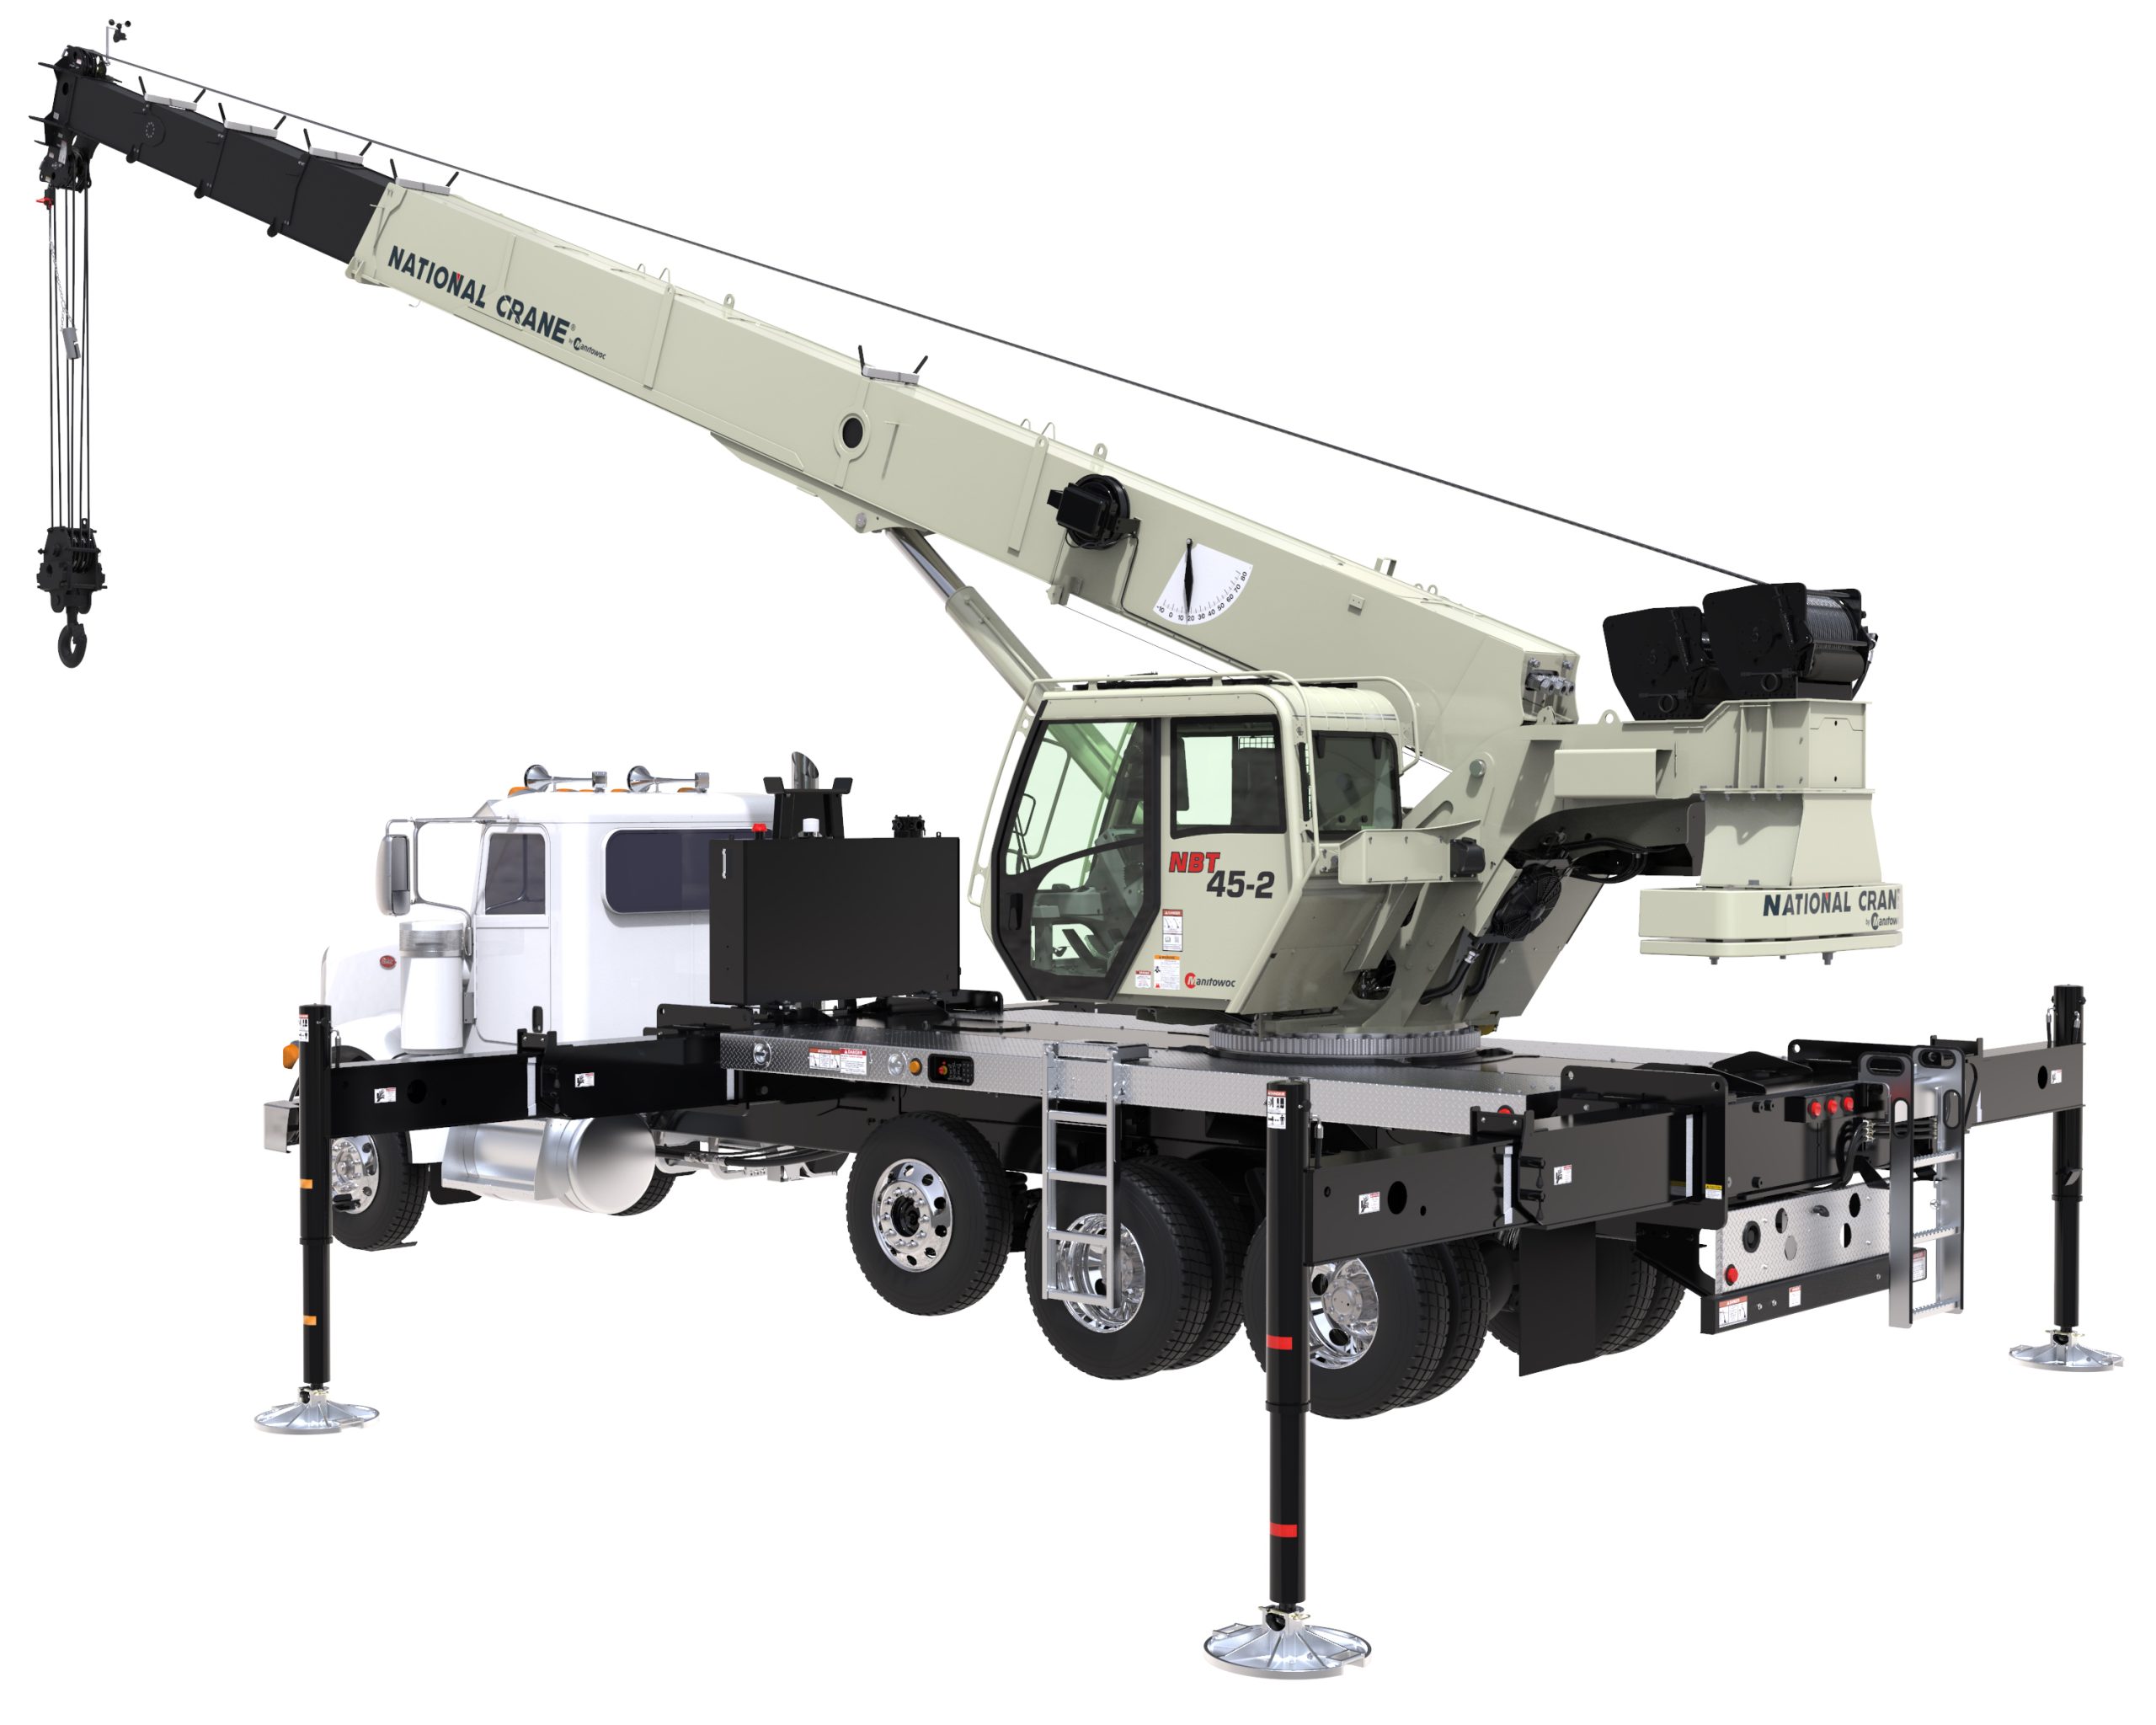 https://www.plantandequipment.news/wp-content/uploads/2021/10/Manitowoc-to-showcase-new-product-strength-at-The-Utility-Expo-02-bc-scaled.jpg